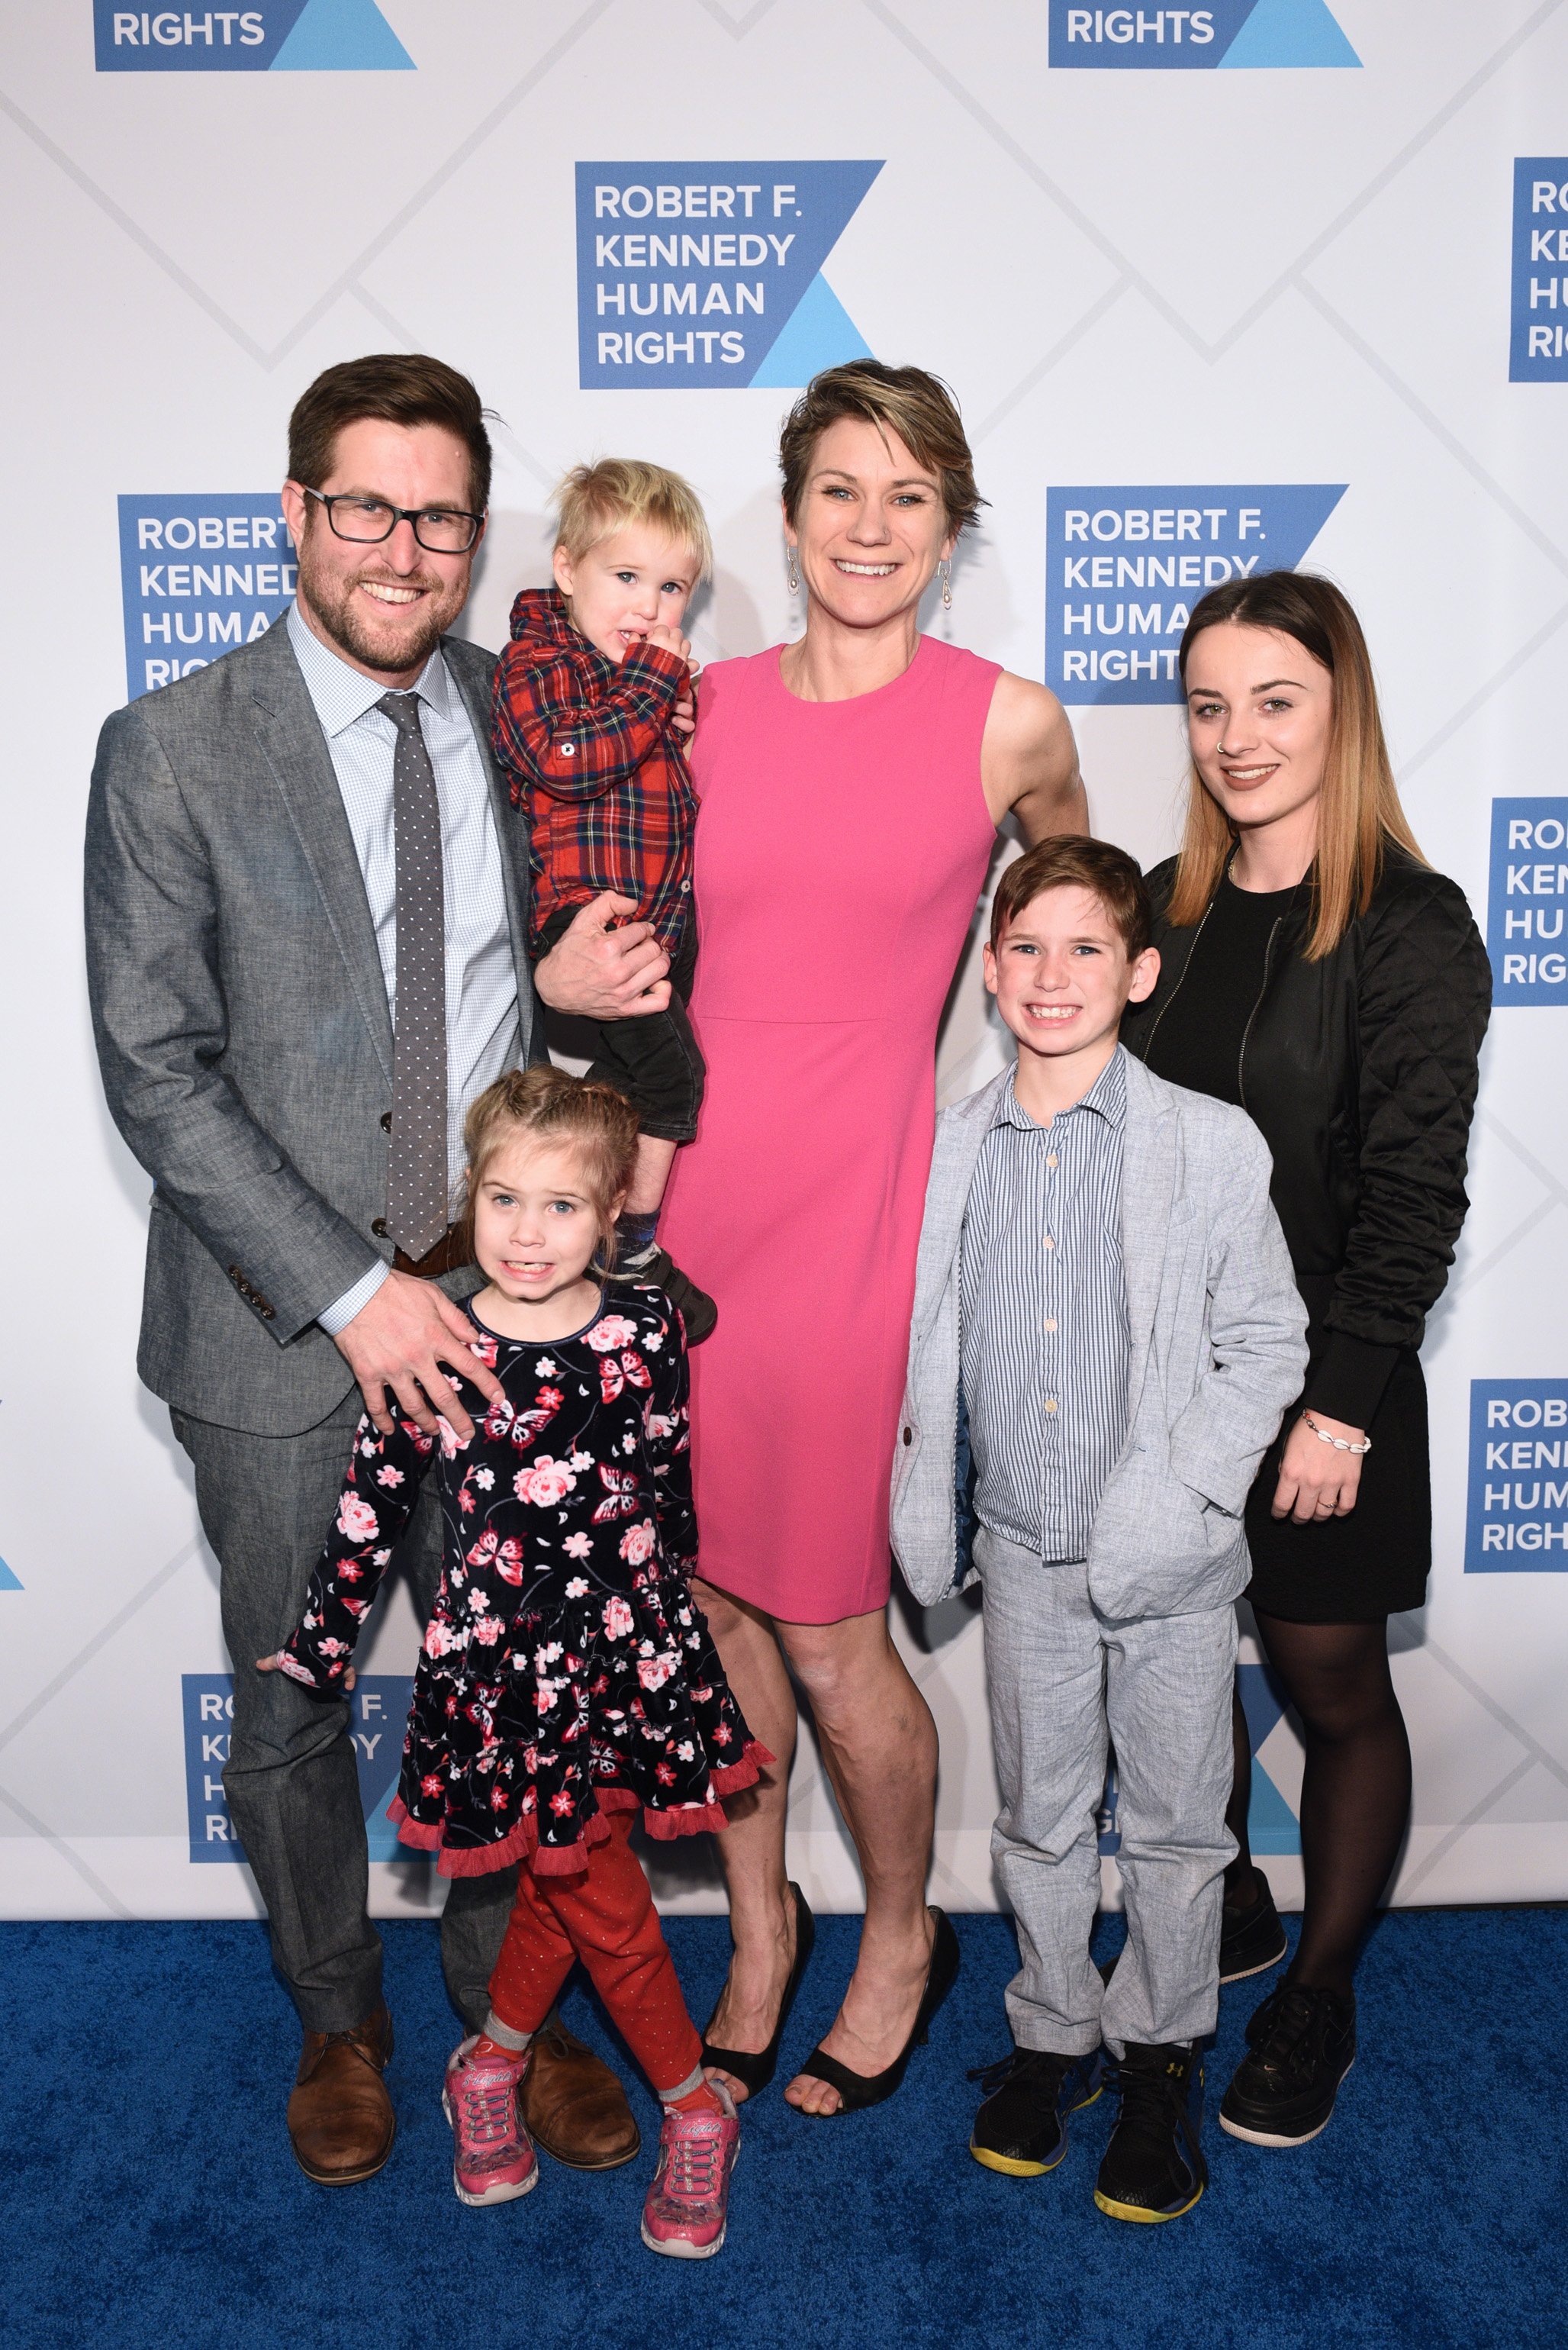 David McKean, Maeve Kennedy Townsend Mckean and family attend the Robert F. Kennedy Human Rights Hosts 2019 Ripple Of Hope Gala & Auction on December 12, 2019, in New York City. | Source: Getty Images.